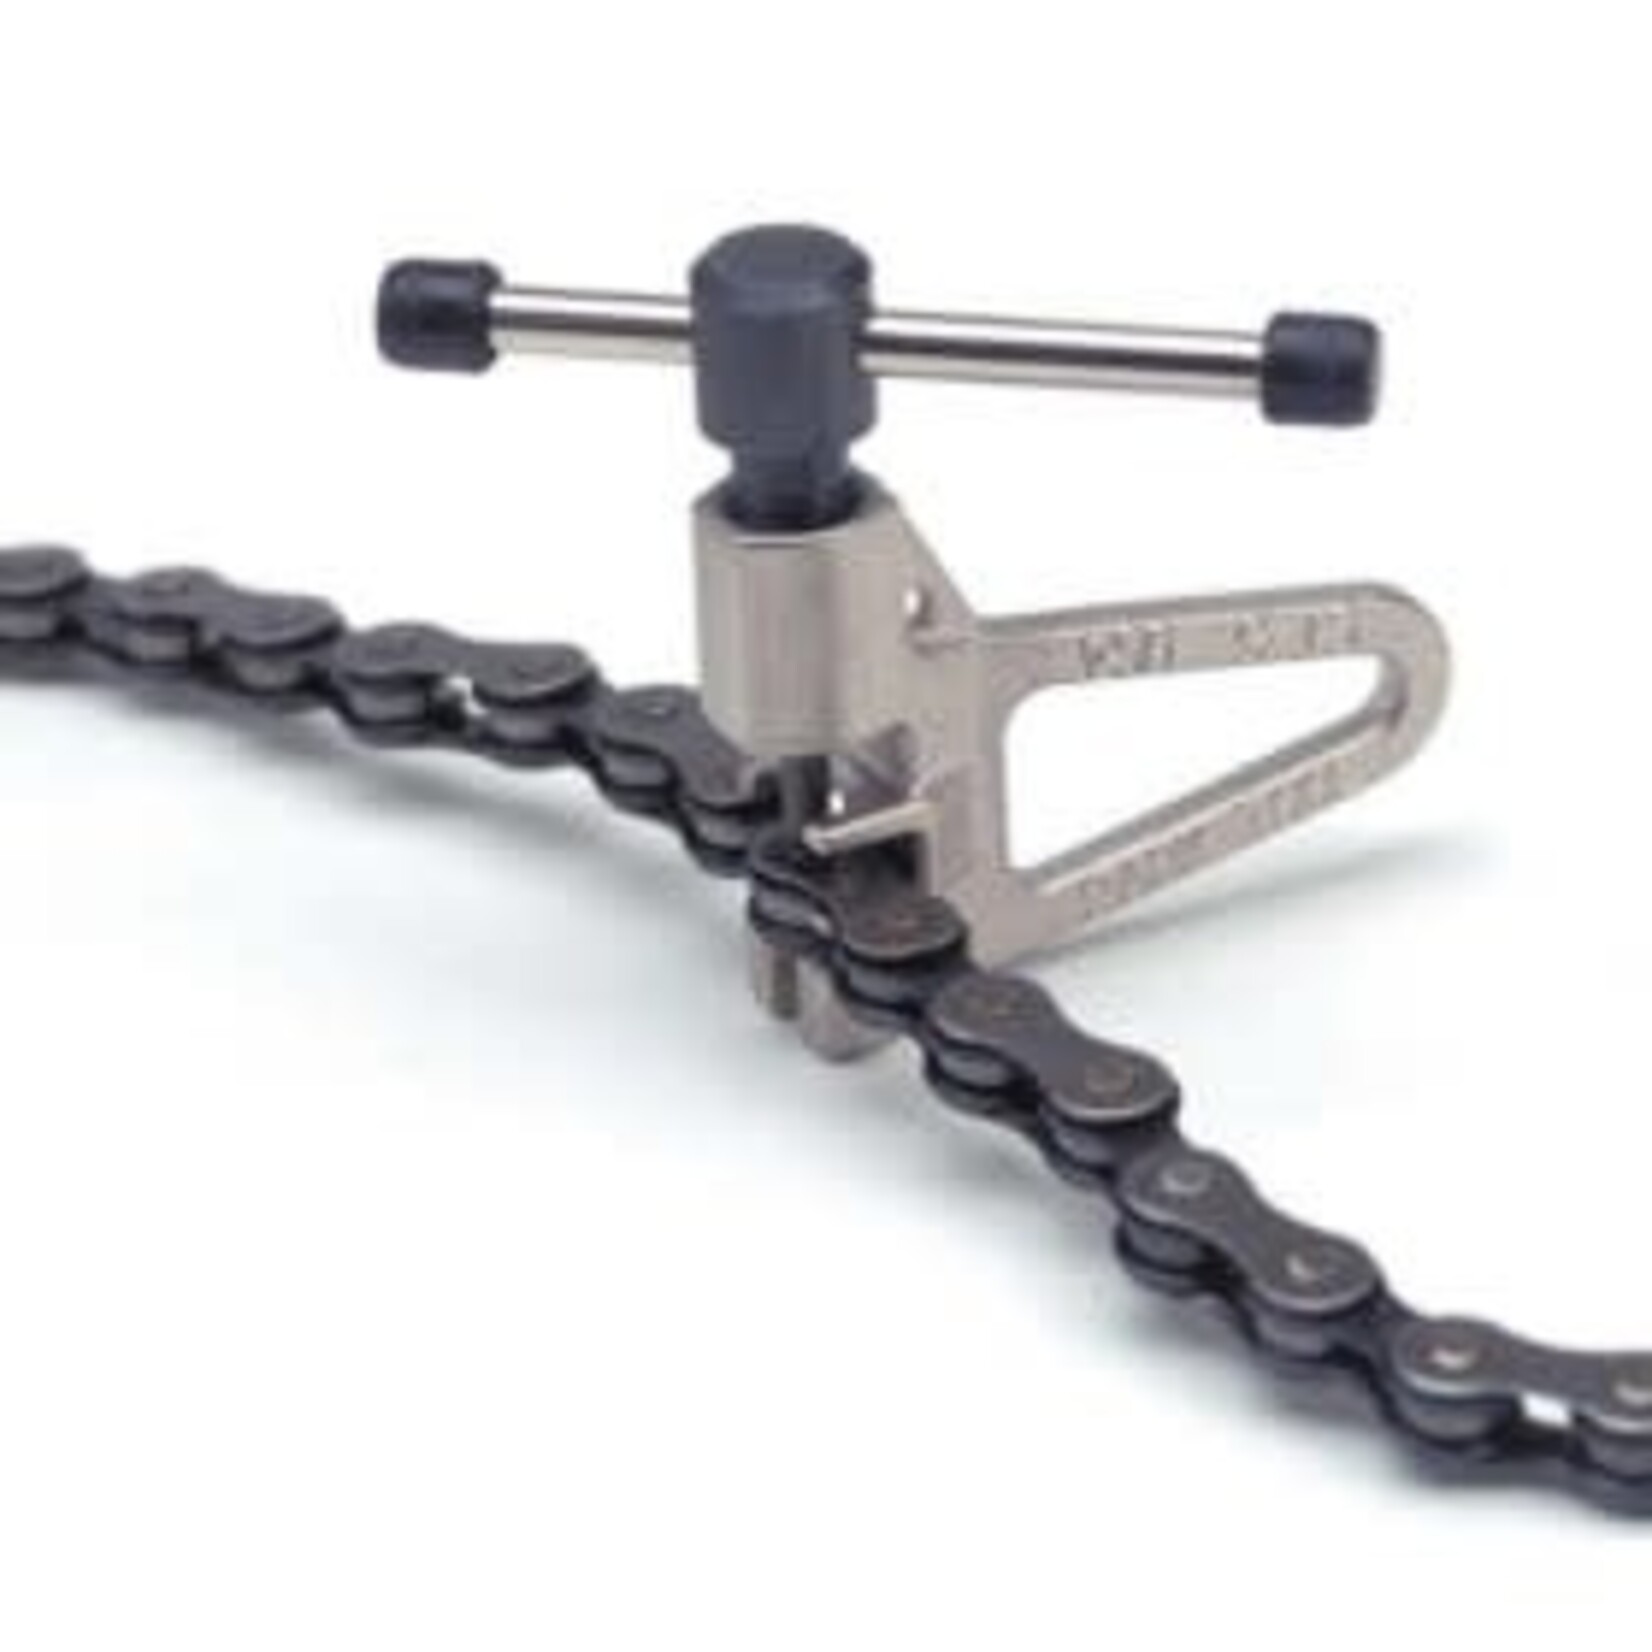 Park Tool CT 5 CHAIN BRUTE